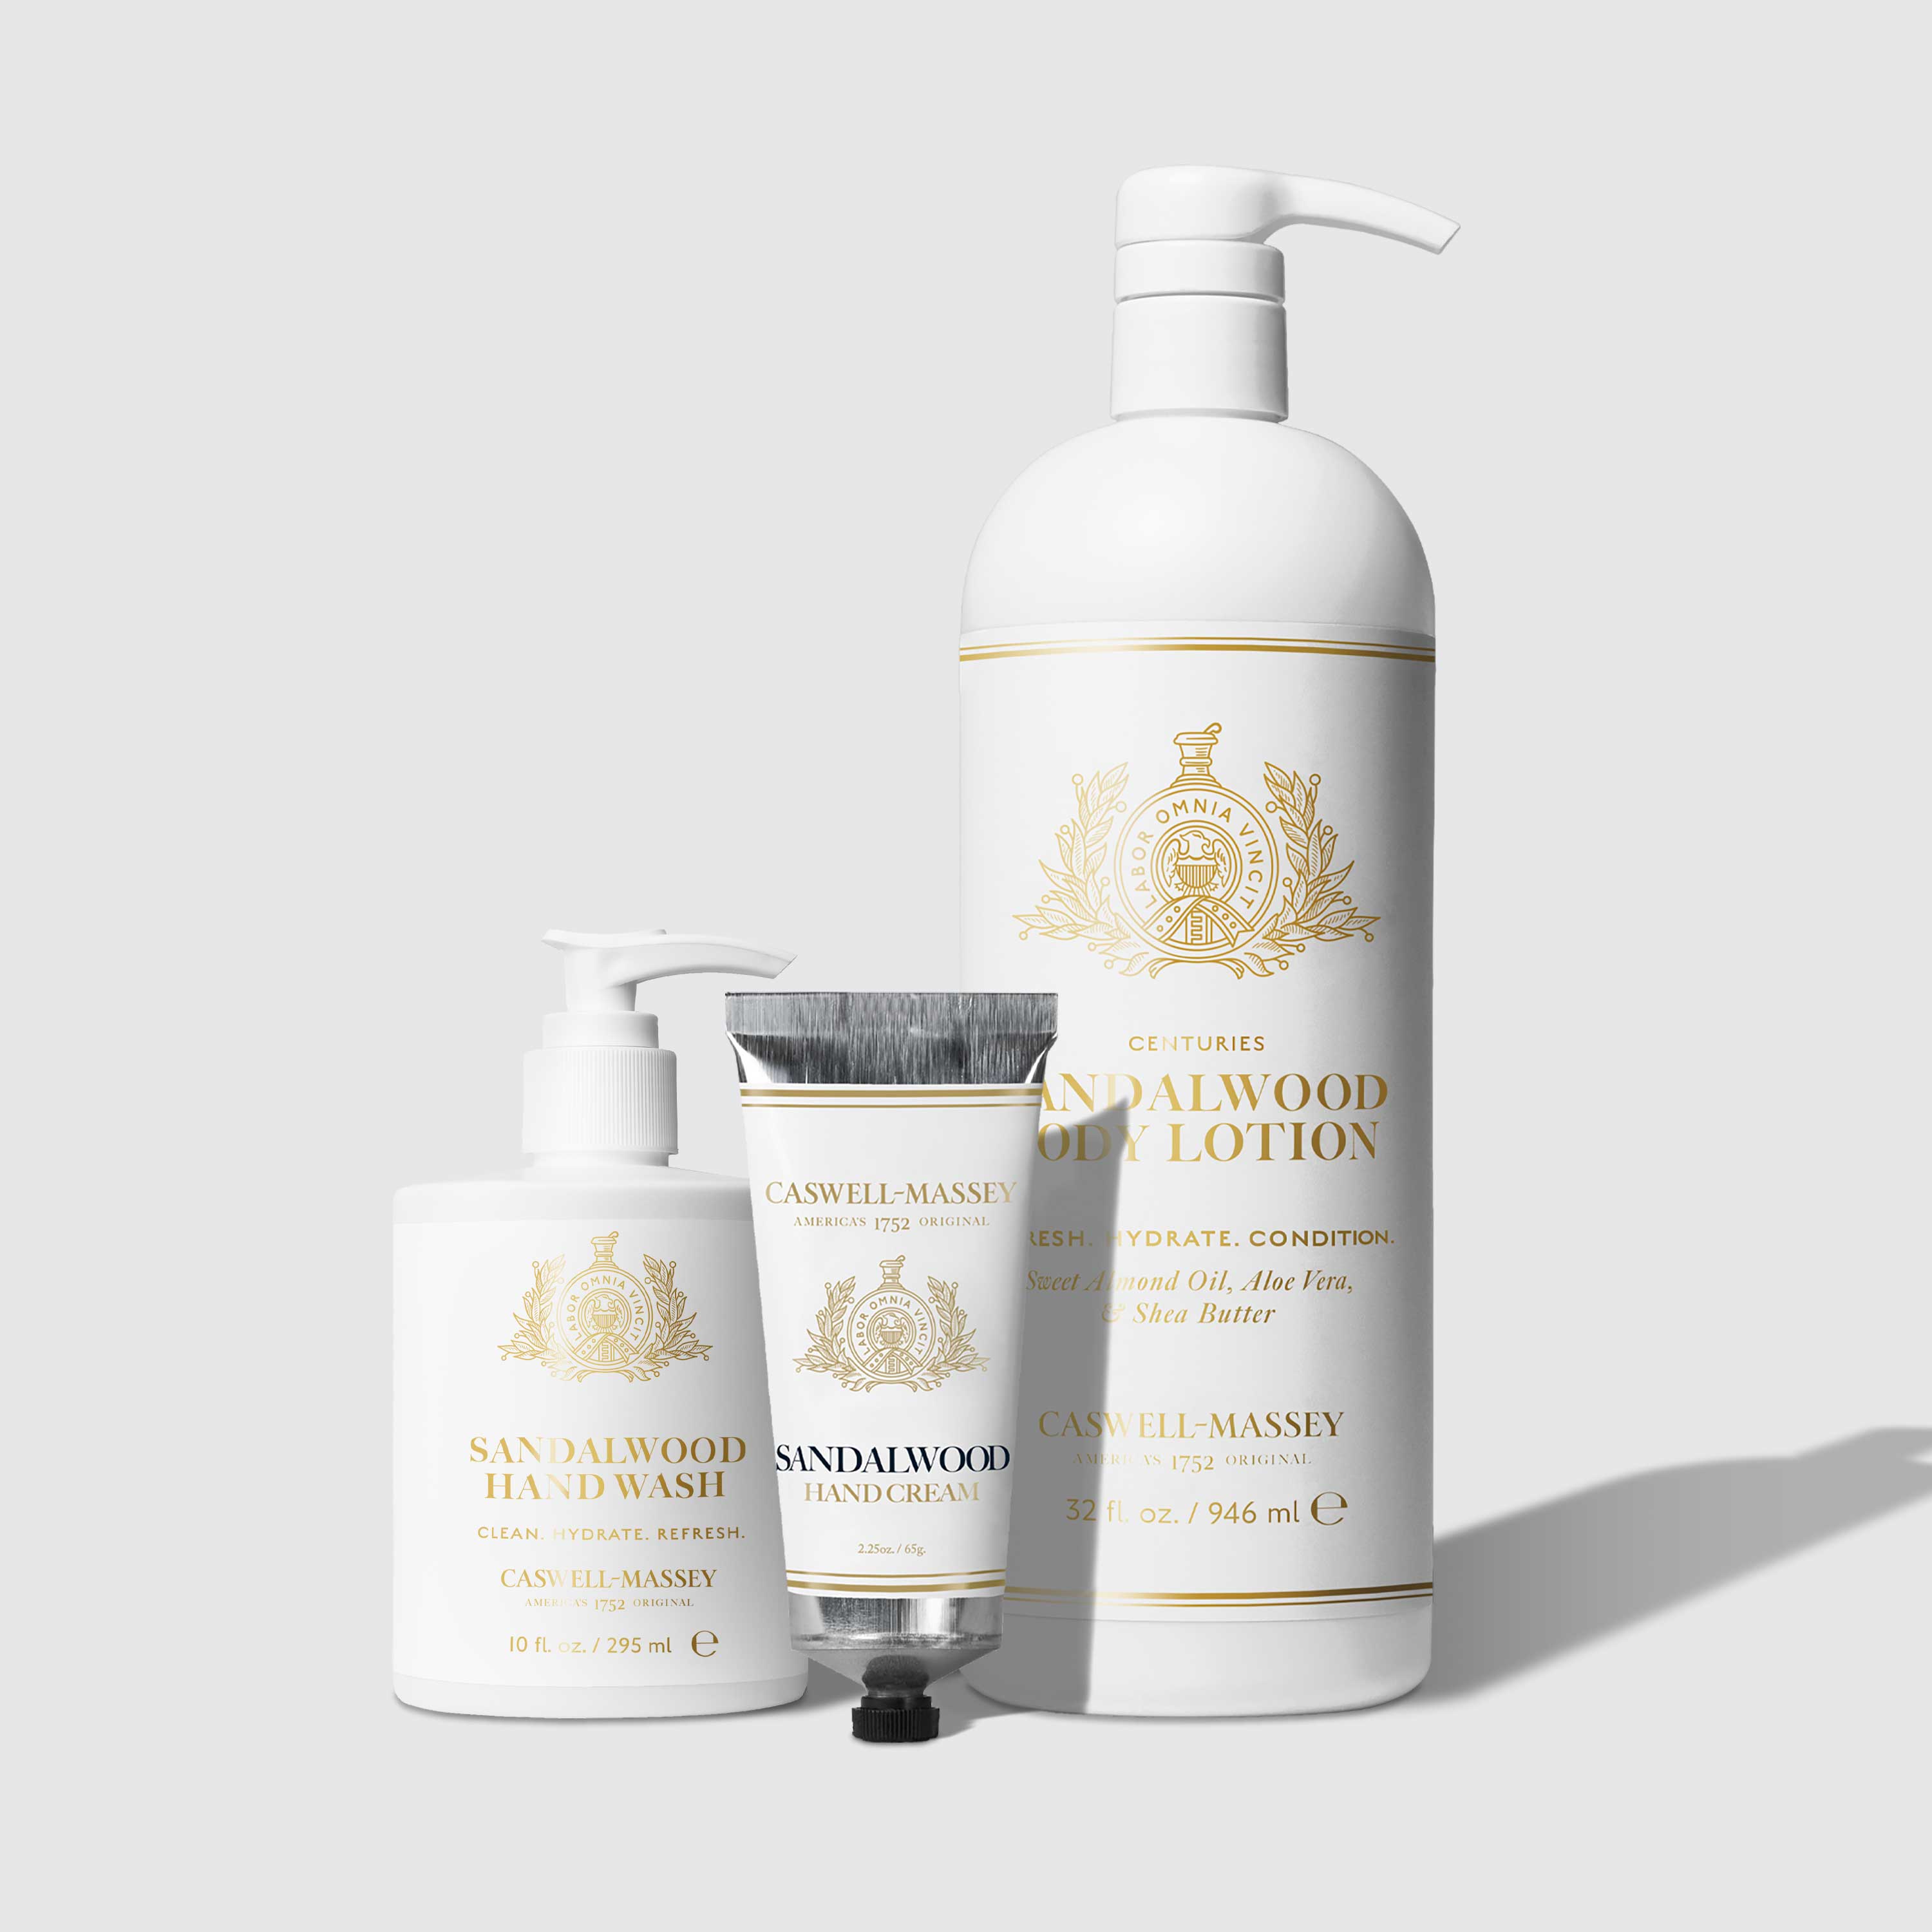 Caswell-Massey Sandalwood Hand Wash shown with Sandalwood Hand Cream and Sandalwood Body Lotion